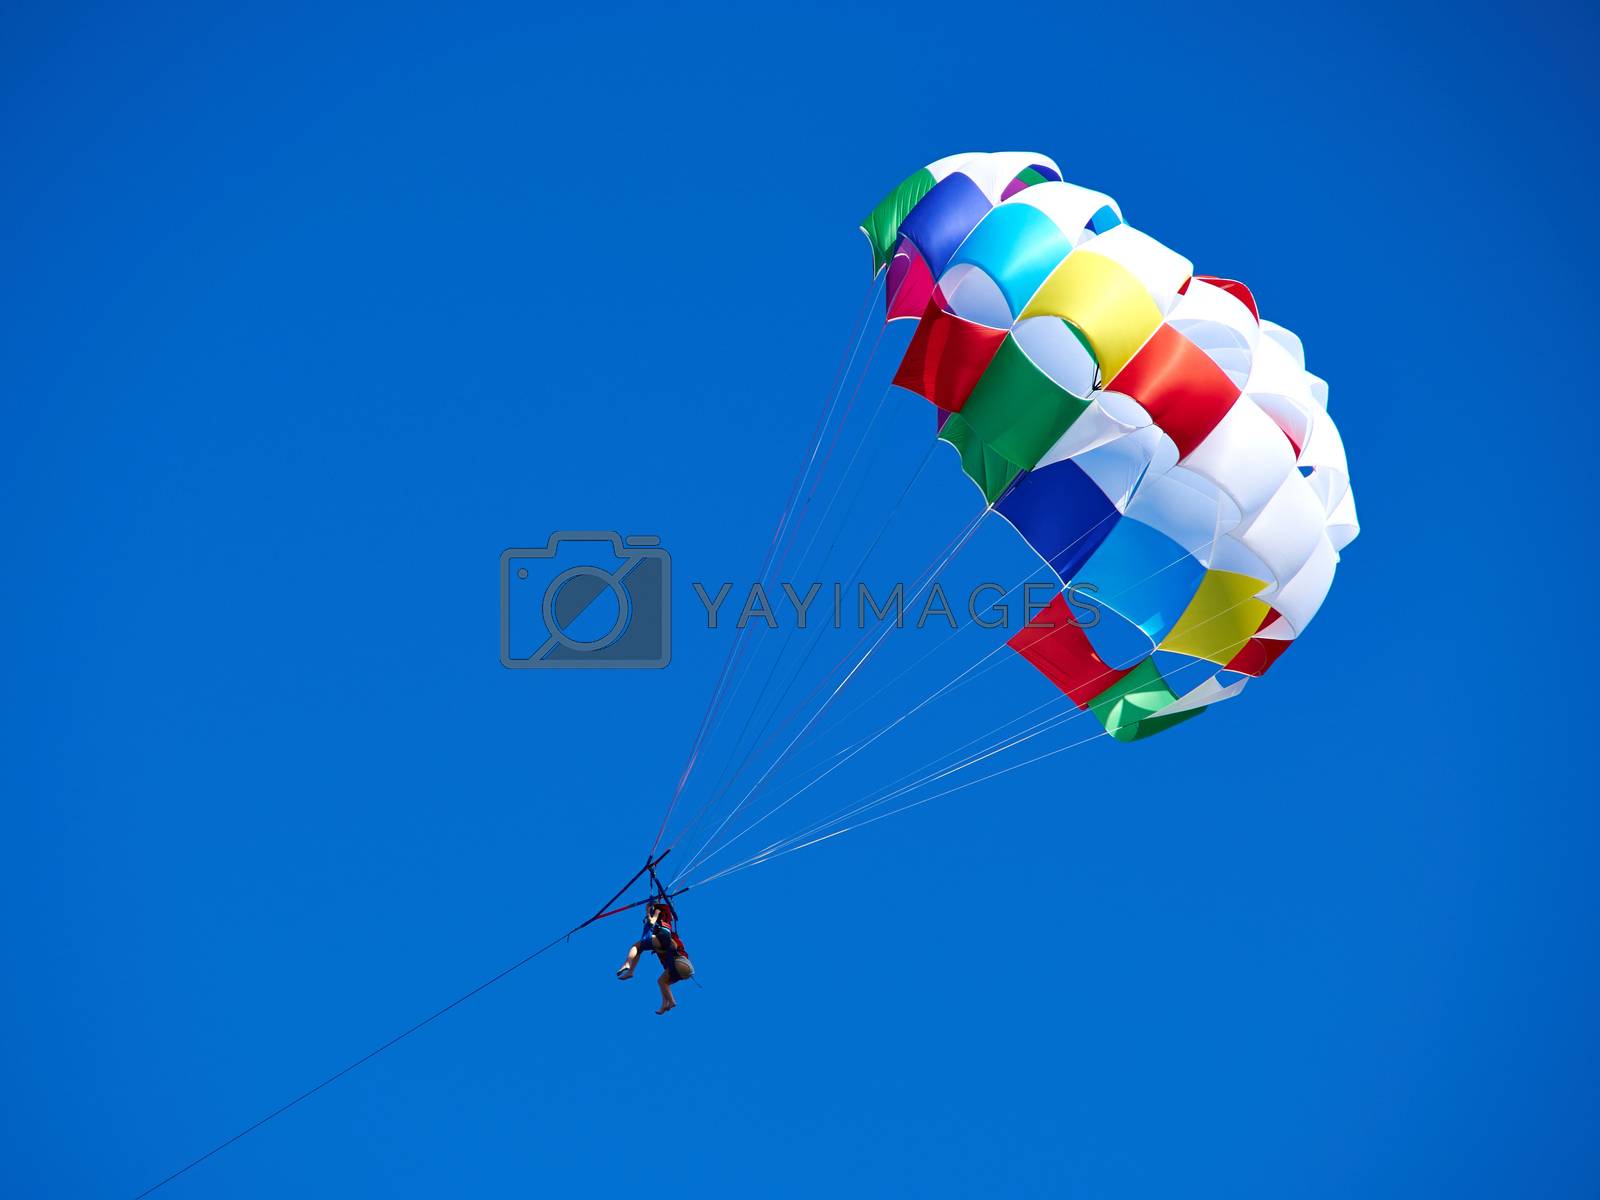 Royalty free image of Parasailing popular vacation activity in summer resorts  by Ronyzmbow